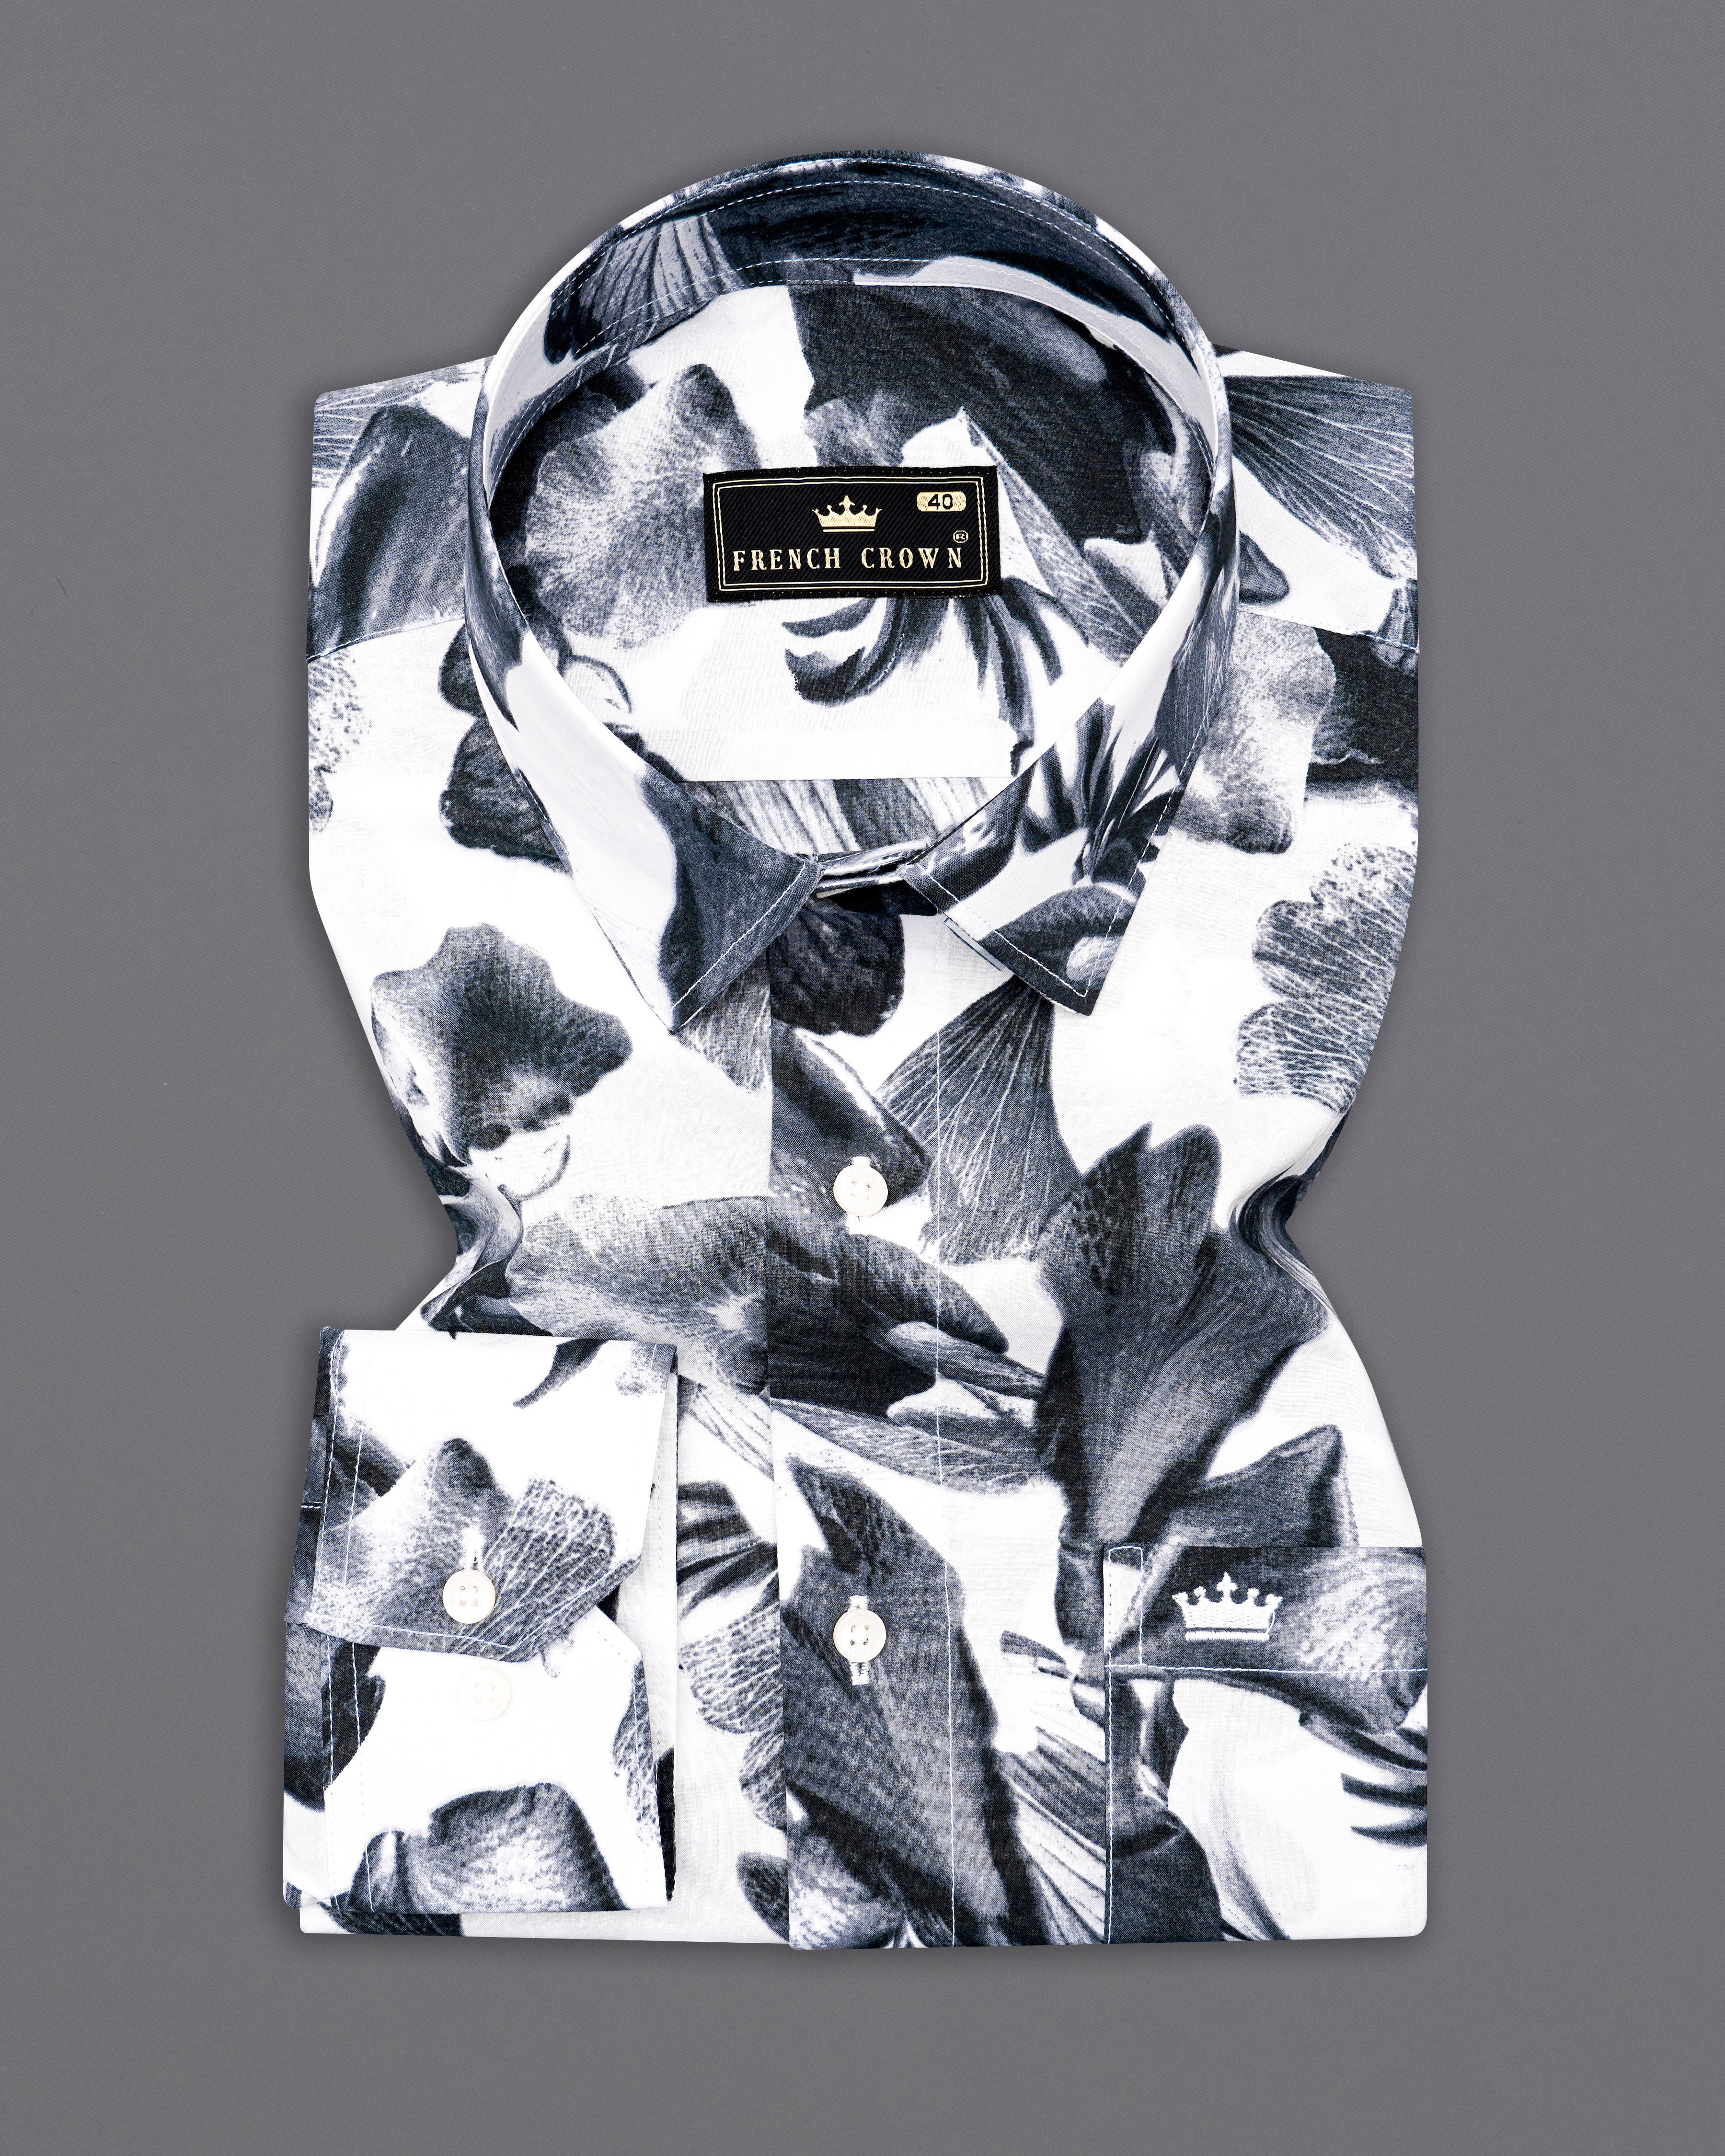 Bright White with Storm Gray Leaves Printed Premium Cotton Shirt 9901-38, 9901-H-38, 9901-39, 9901-H-39, 9901-40, 9901-H-40, 9901-42, 9901-H-42, 9901-44, 9901-H-44, 9901-46, 9901-H-46, 9901-48, 9901-H-48, 9901-50, 9901-H-50, 9901-52, 9901-H-52